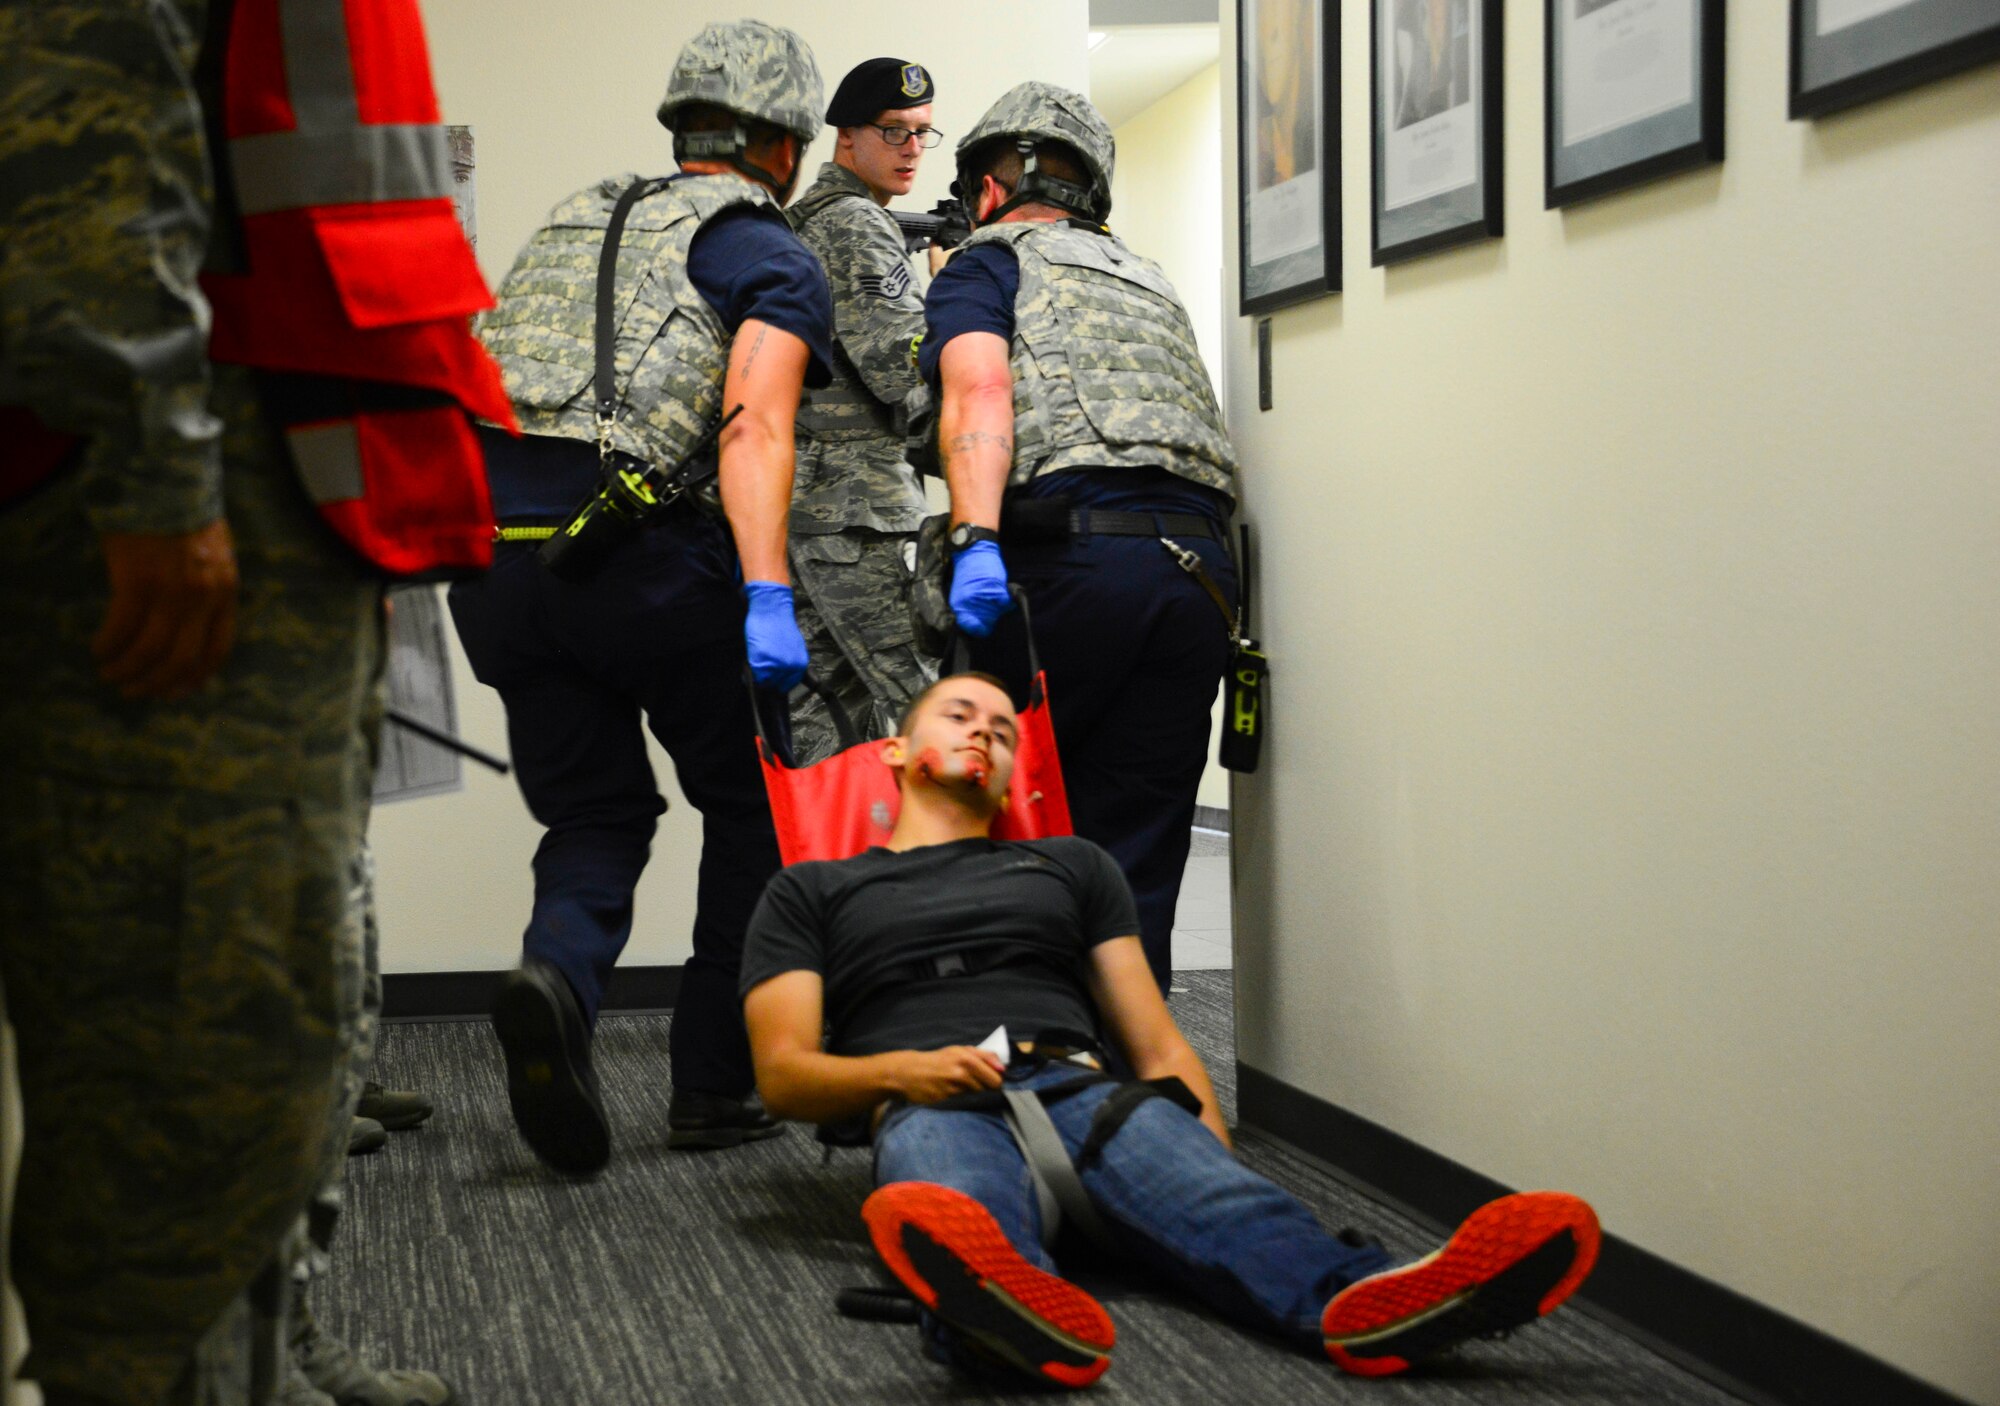 Run, hide, fight – Fairchild conducts active shooter exercise